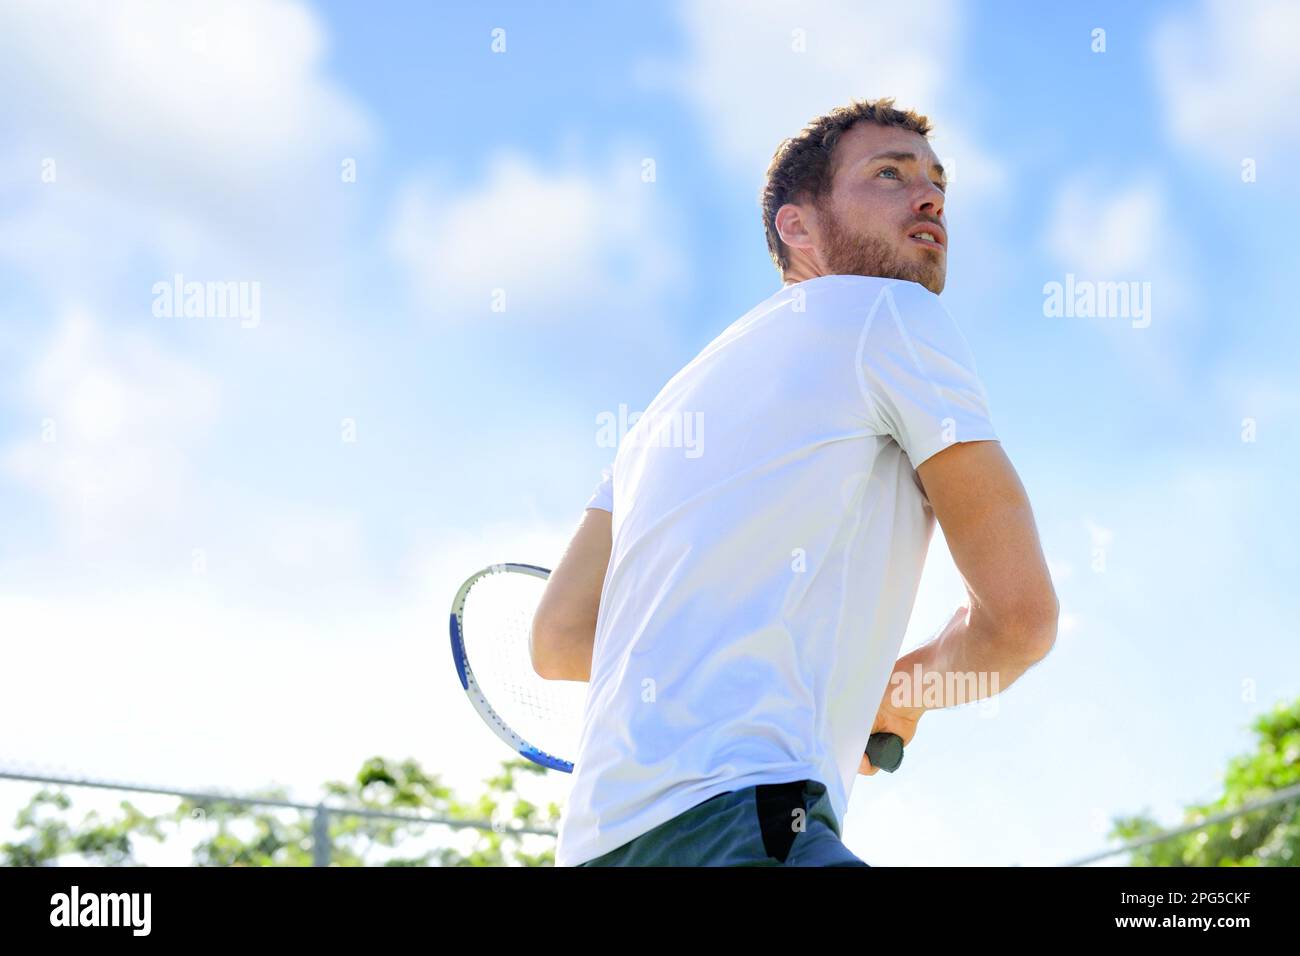 Tennis player man playing game hitting ball finishing serve outdoor. Sport fitness athlete outside with tennis racket. Fit young male caucasian Stock Photo